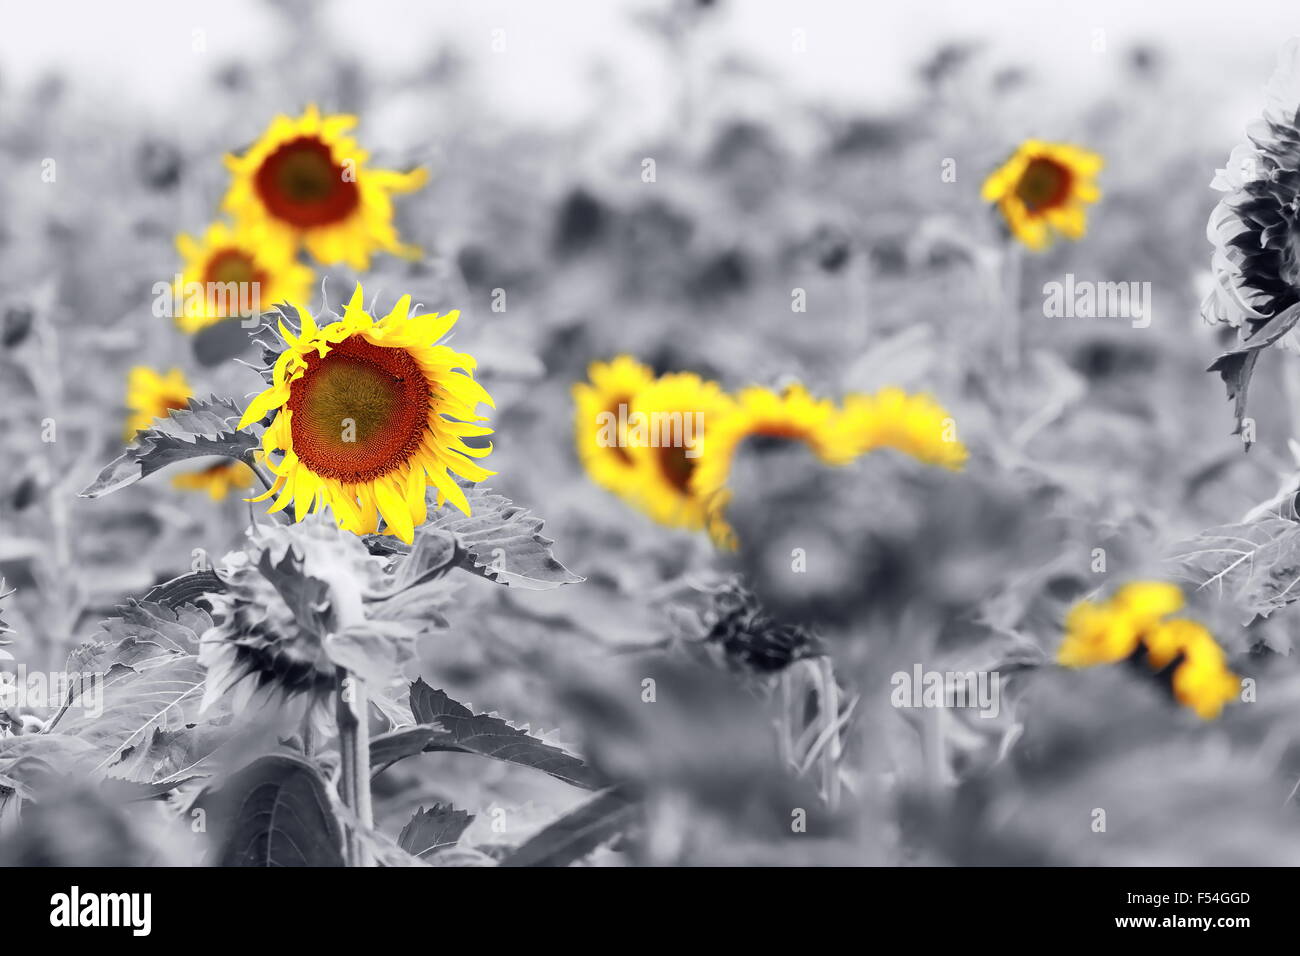 sunflower field abstract view, black and white, colorful flowers Stock Photo